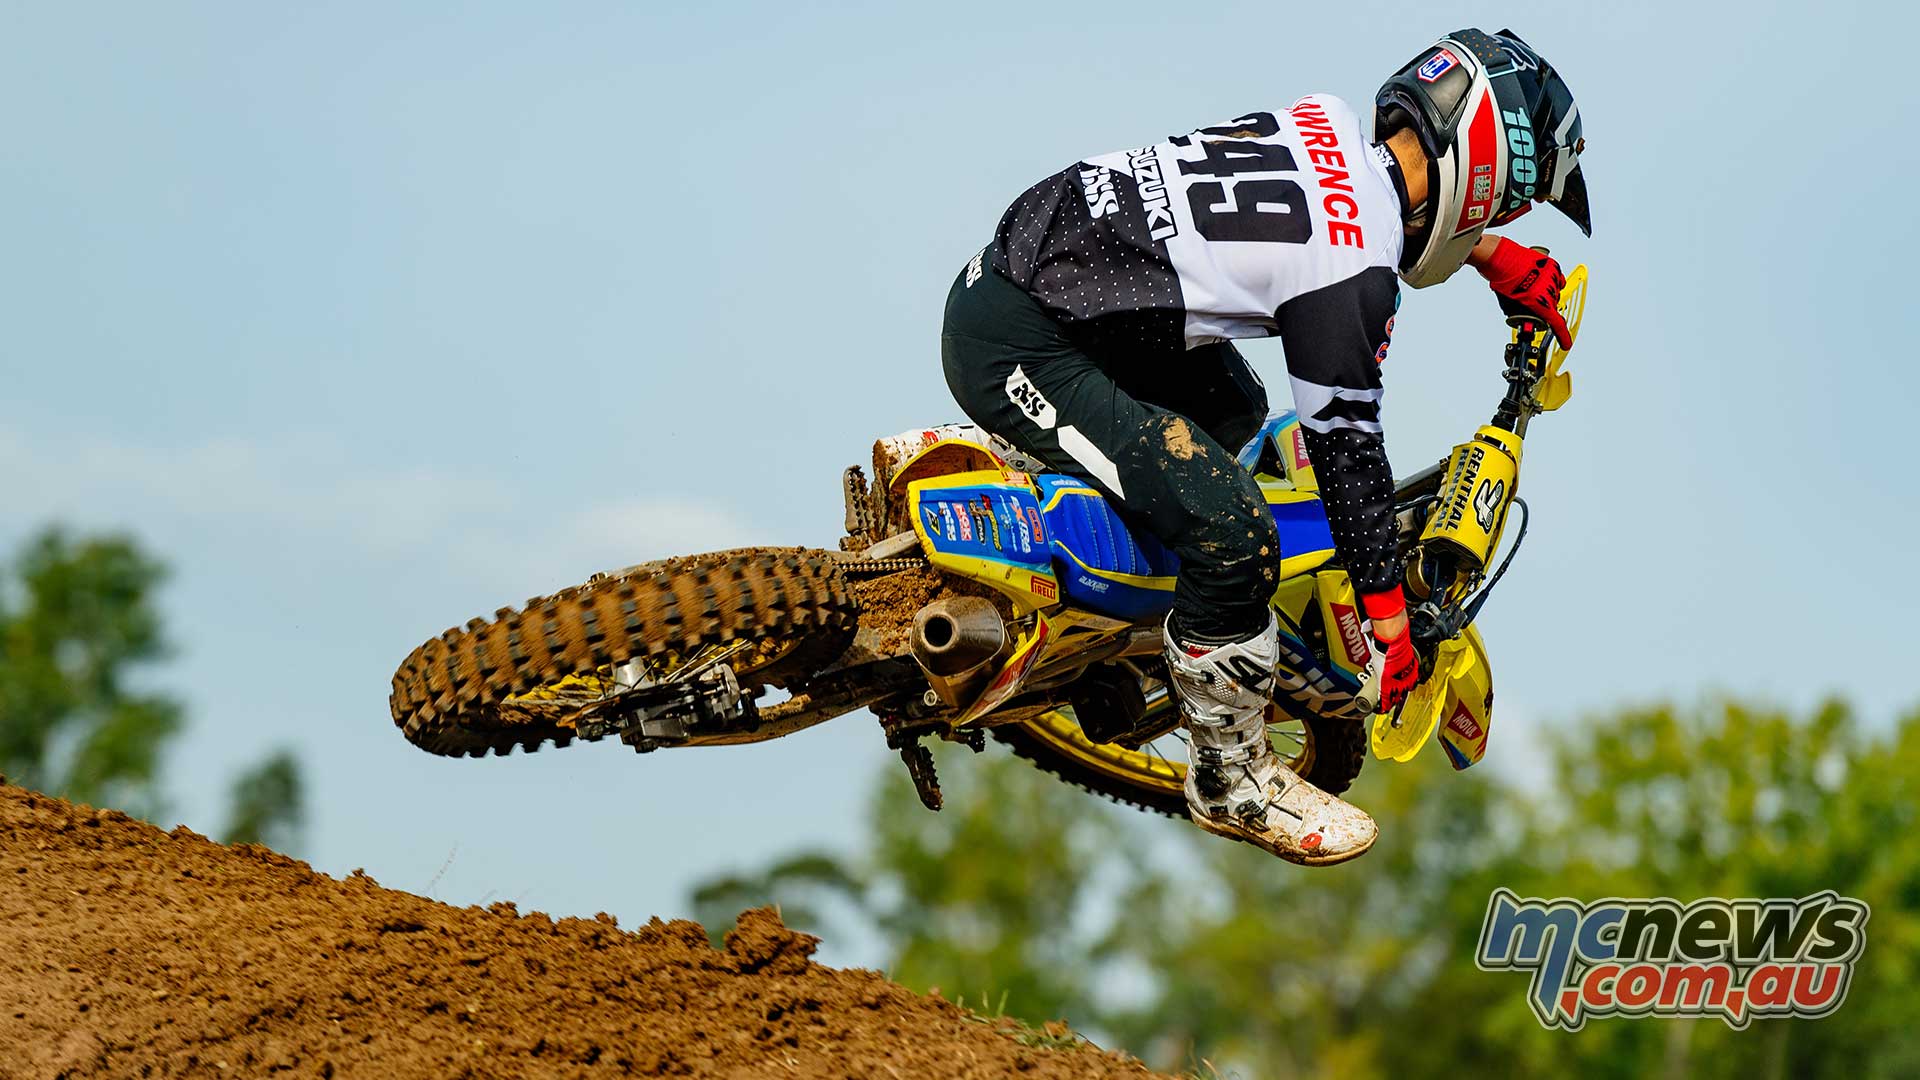 Jett Lawrence wraps up back to back AMA 250 ProMX Championships  MCNews